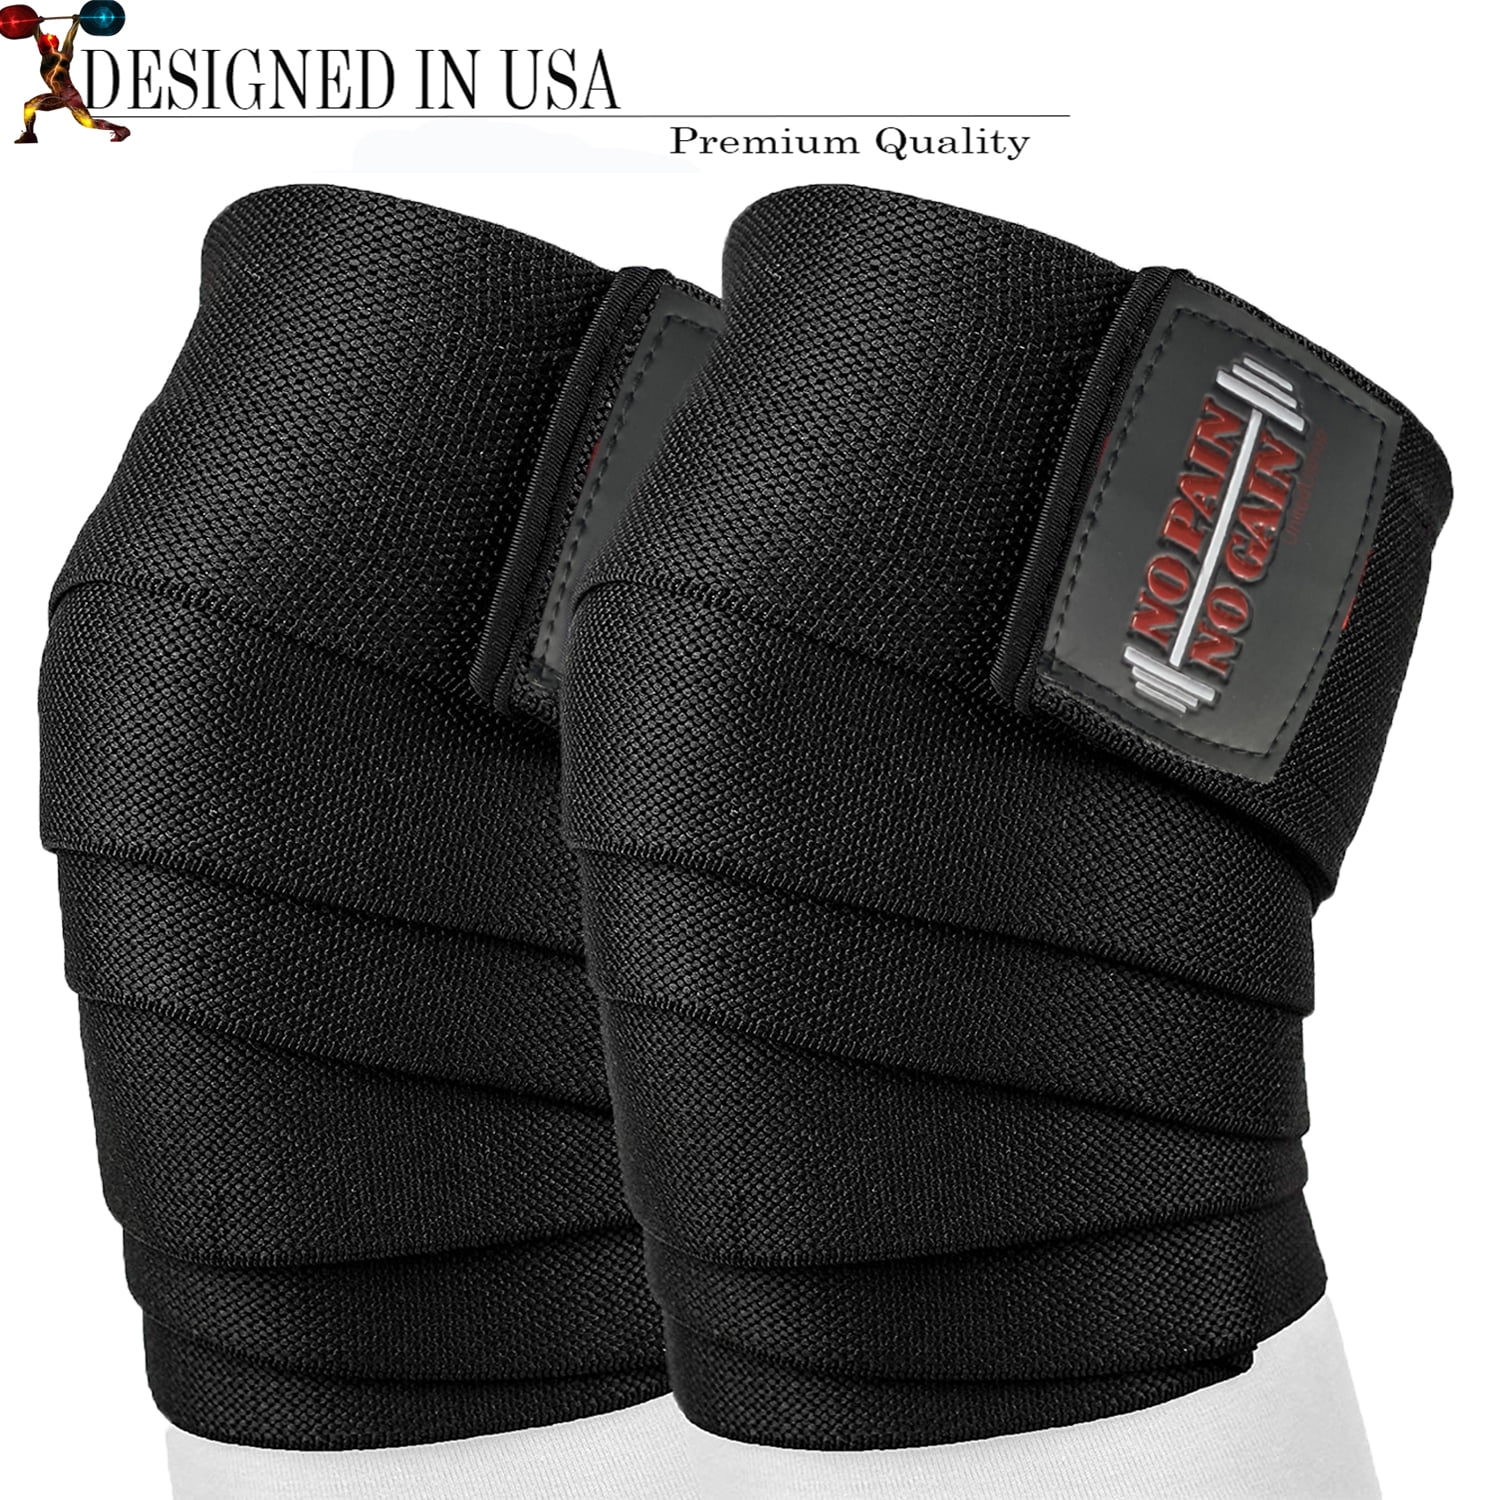 DMoose Knee Wraps Weightlifting I 78 Length Heavy Duty Knee Straps Pair I Avoid Knee Injury I Provides Joint Stability I Cross Training & WODs I Compression & Elastic Support Professional Grade